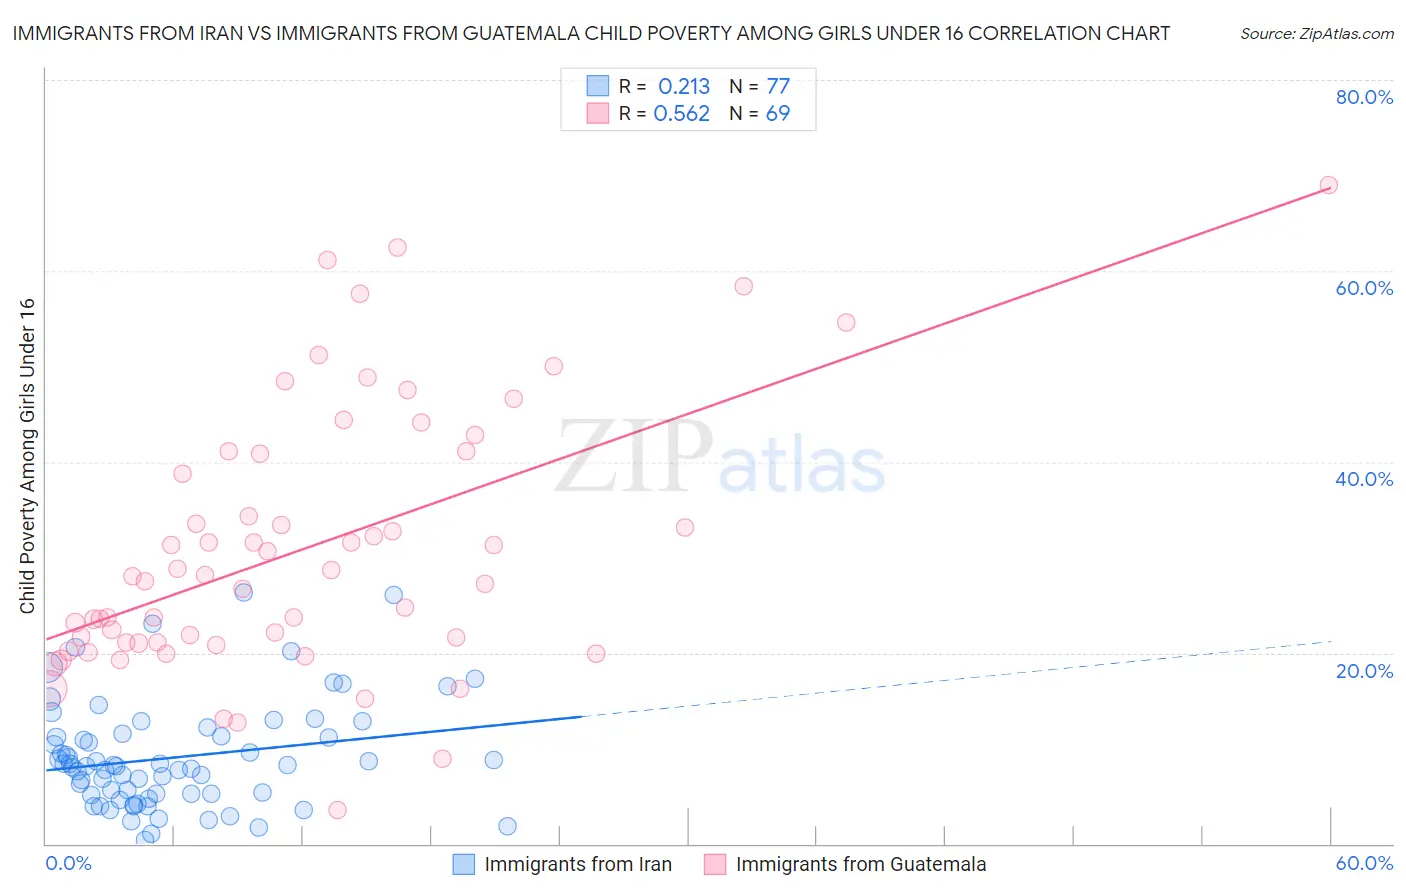 Immigrants from Iran vs Immigrants from Guatemala Child Poverty Among Girls Under 16